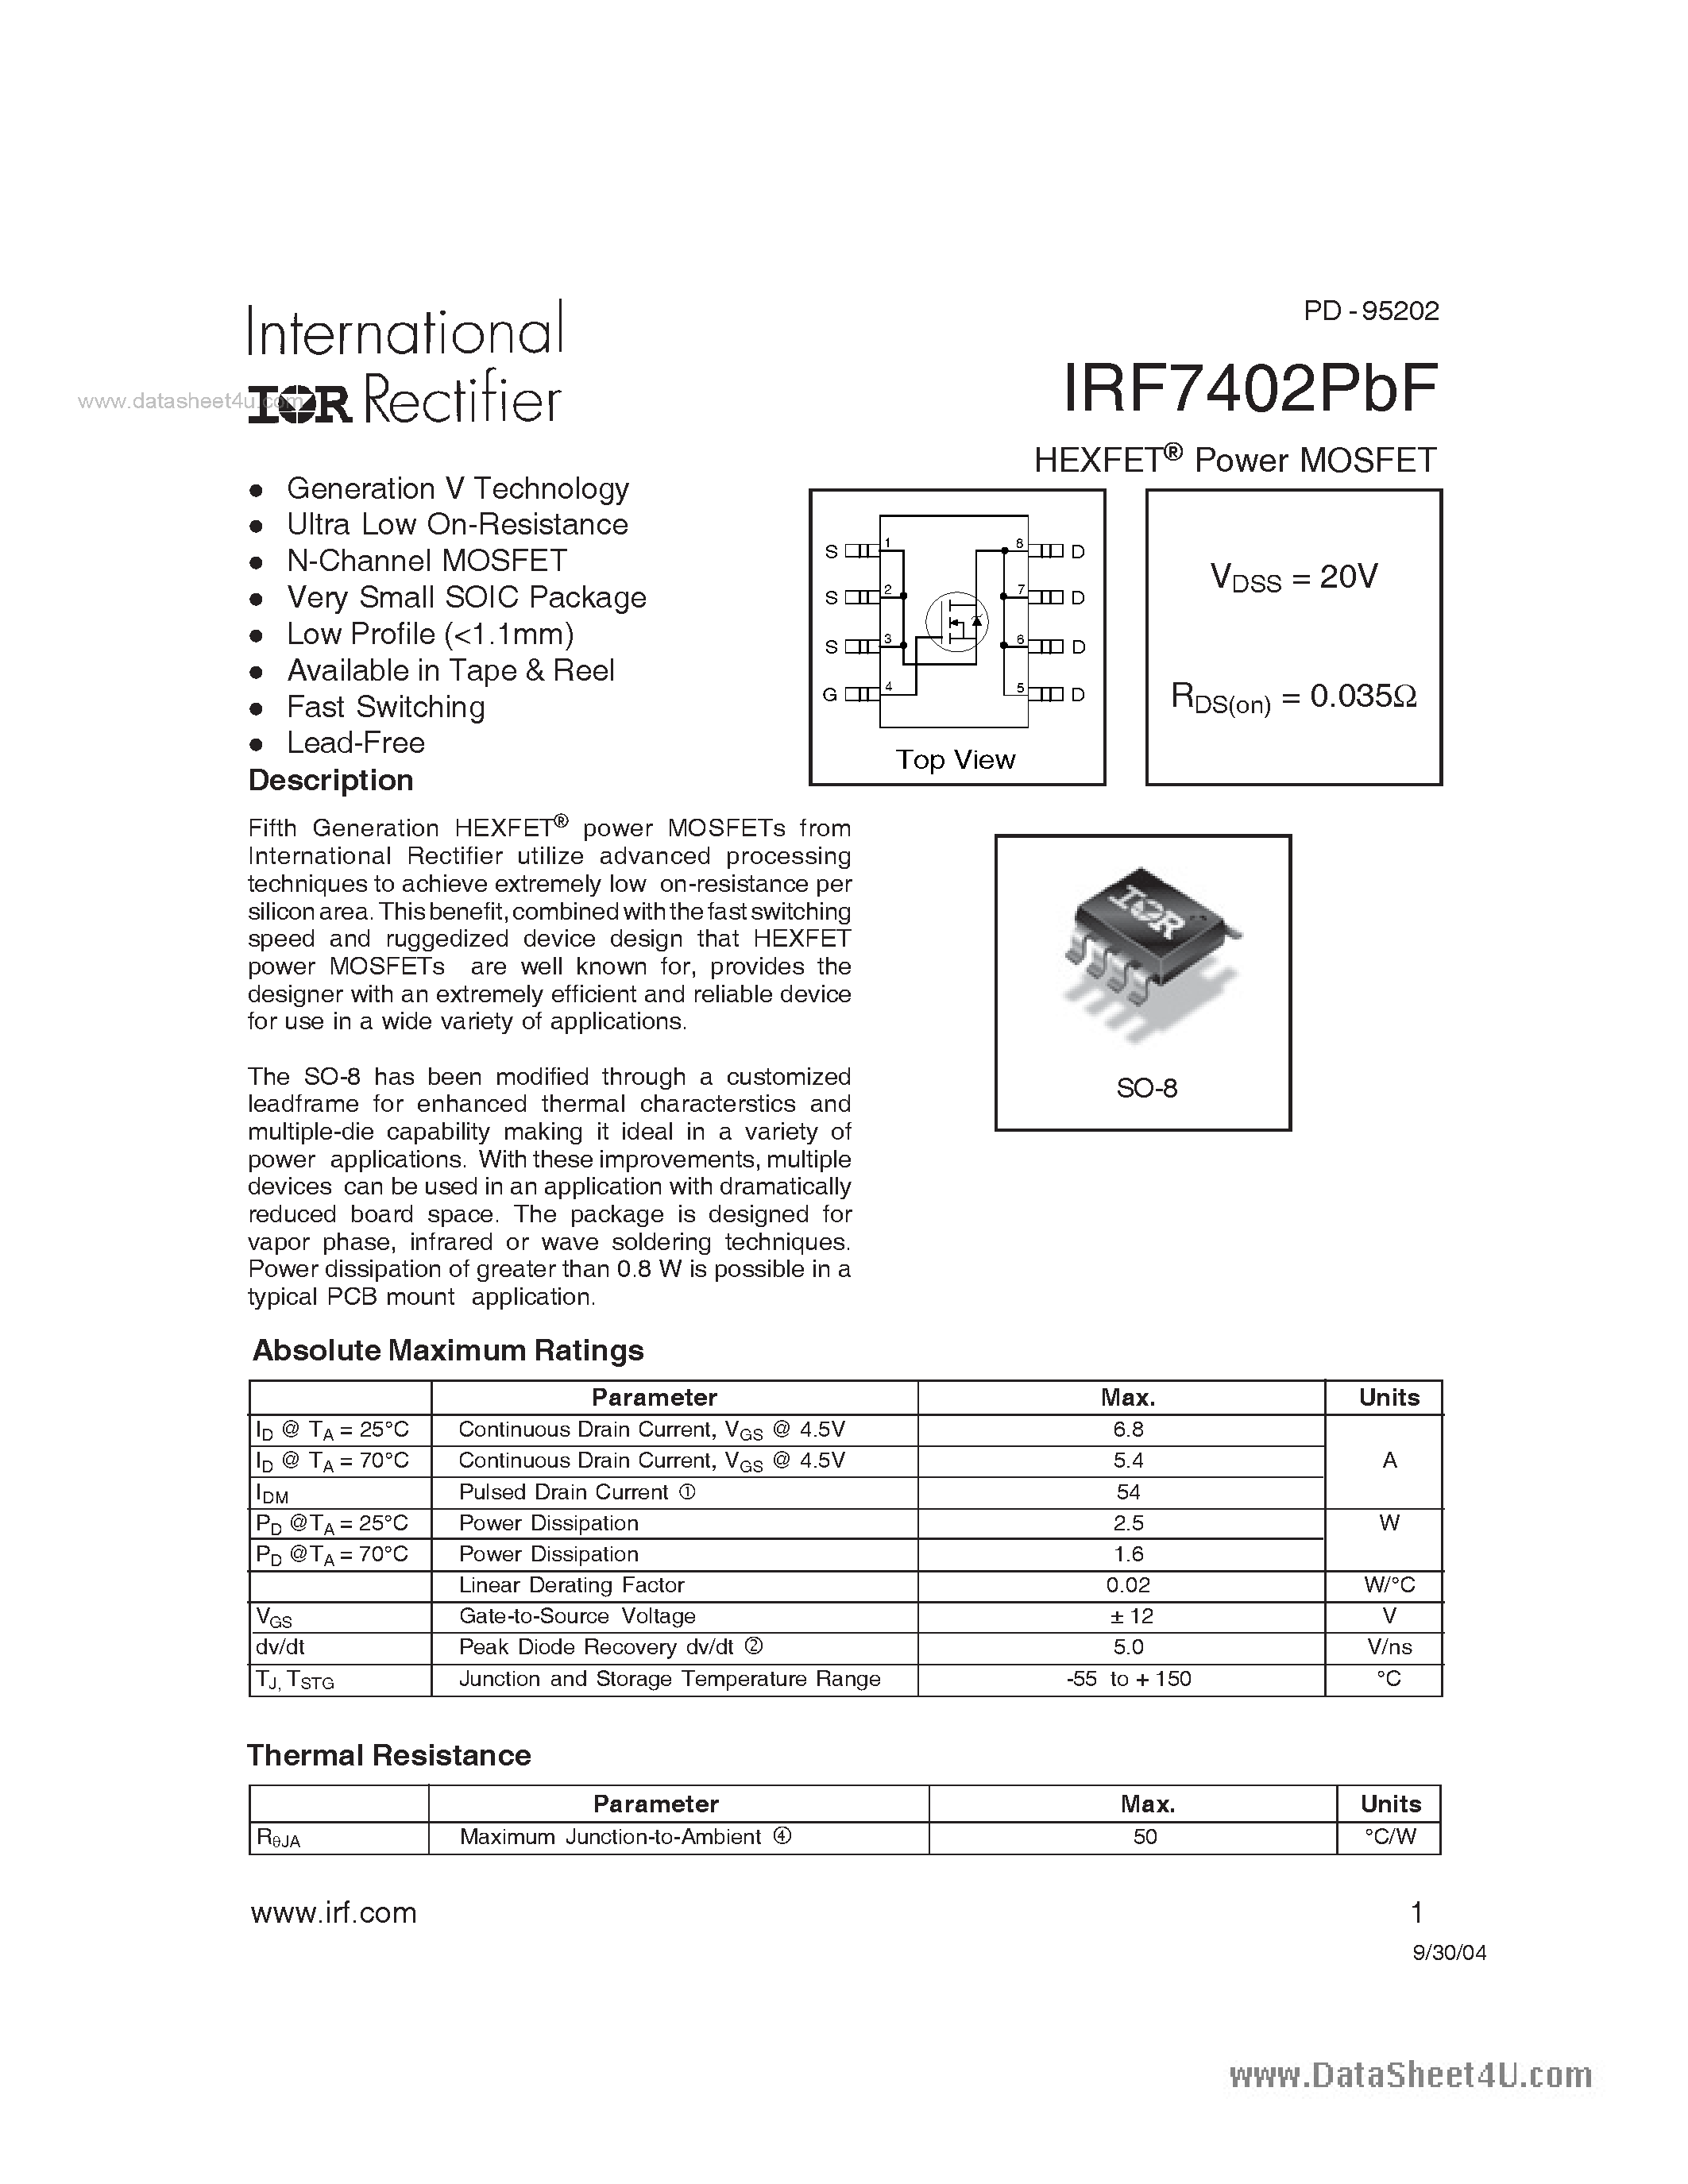 Datasheet IRF7402PBF - Power MOSFET page 1